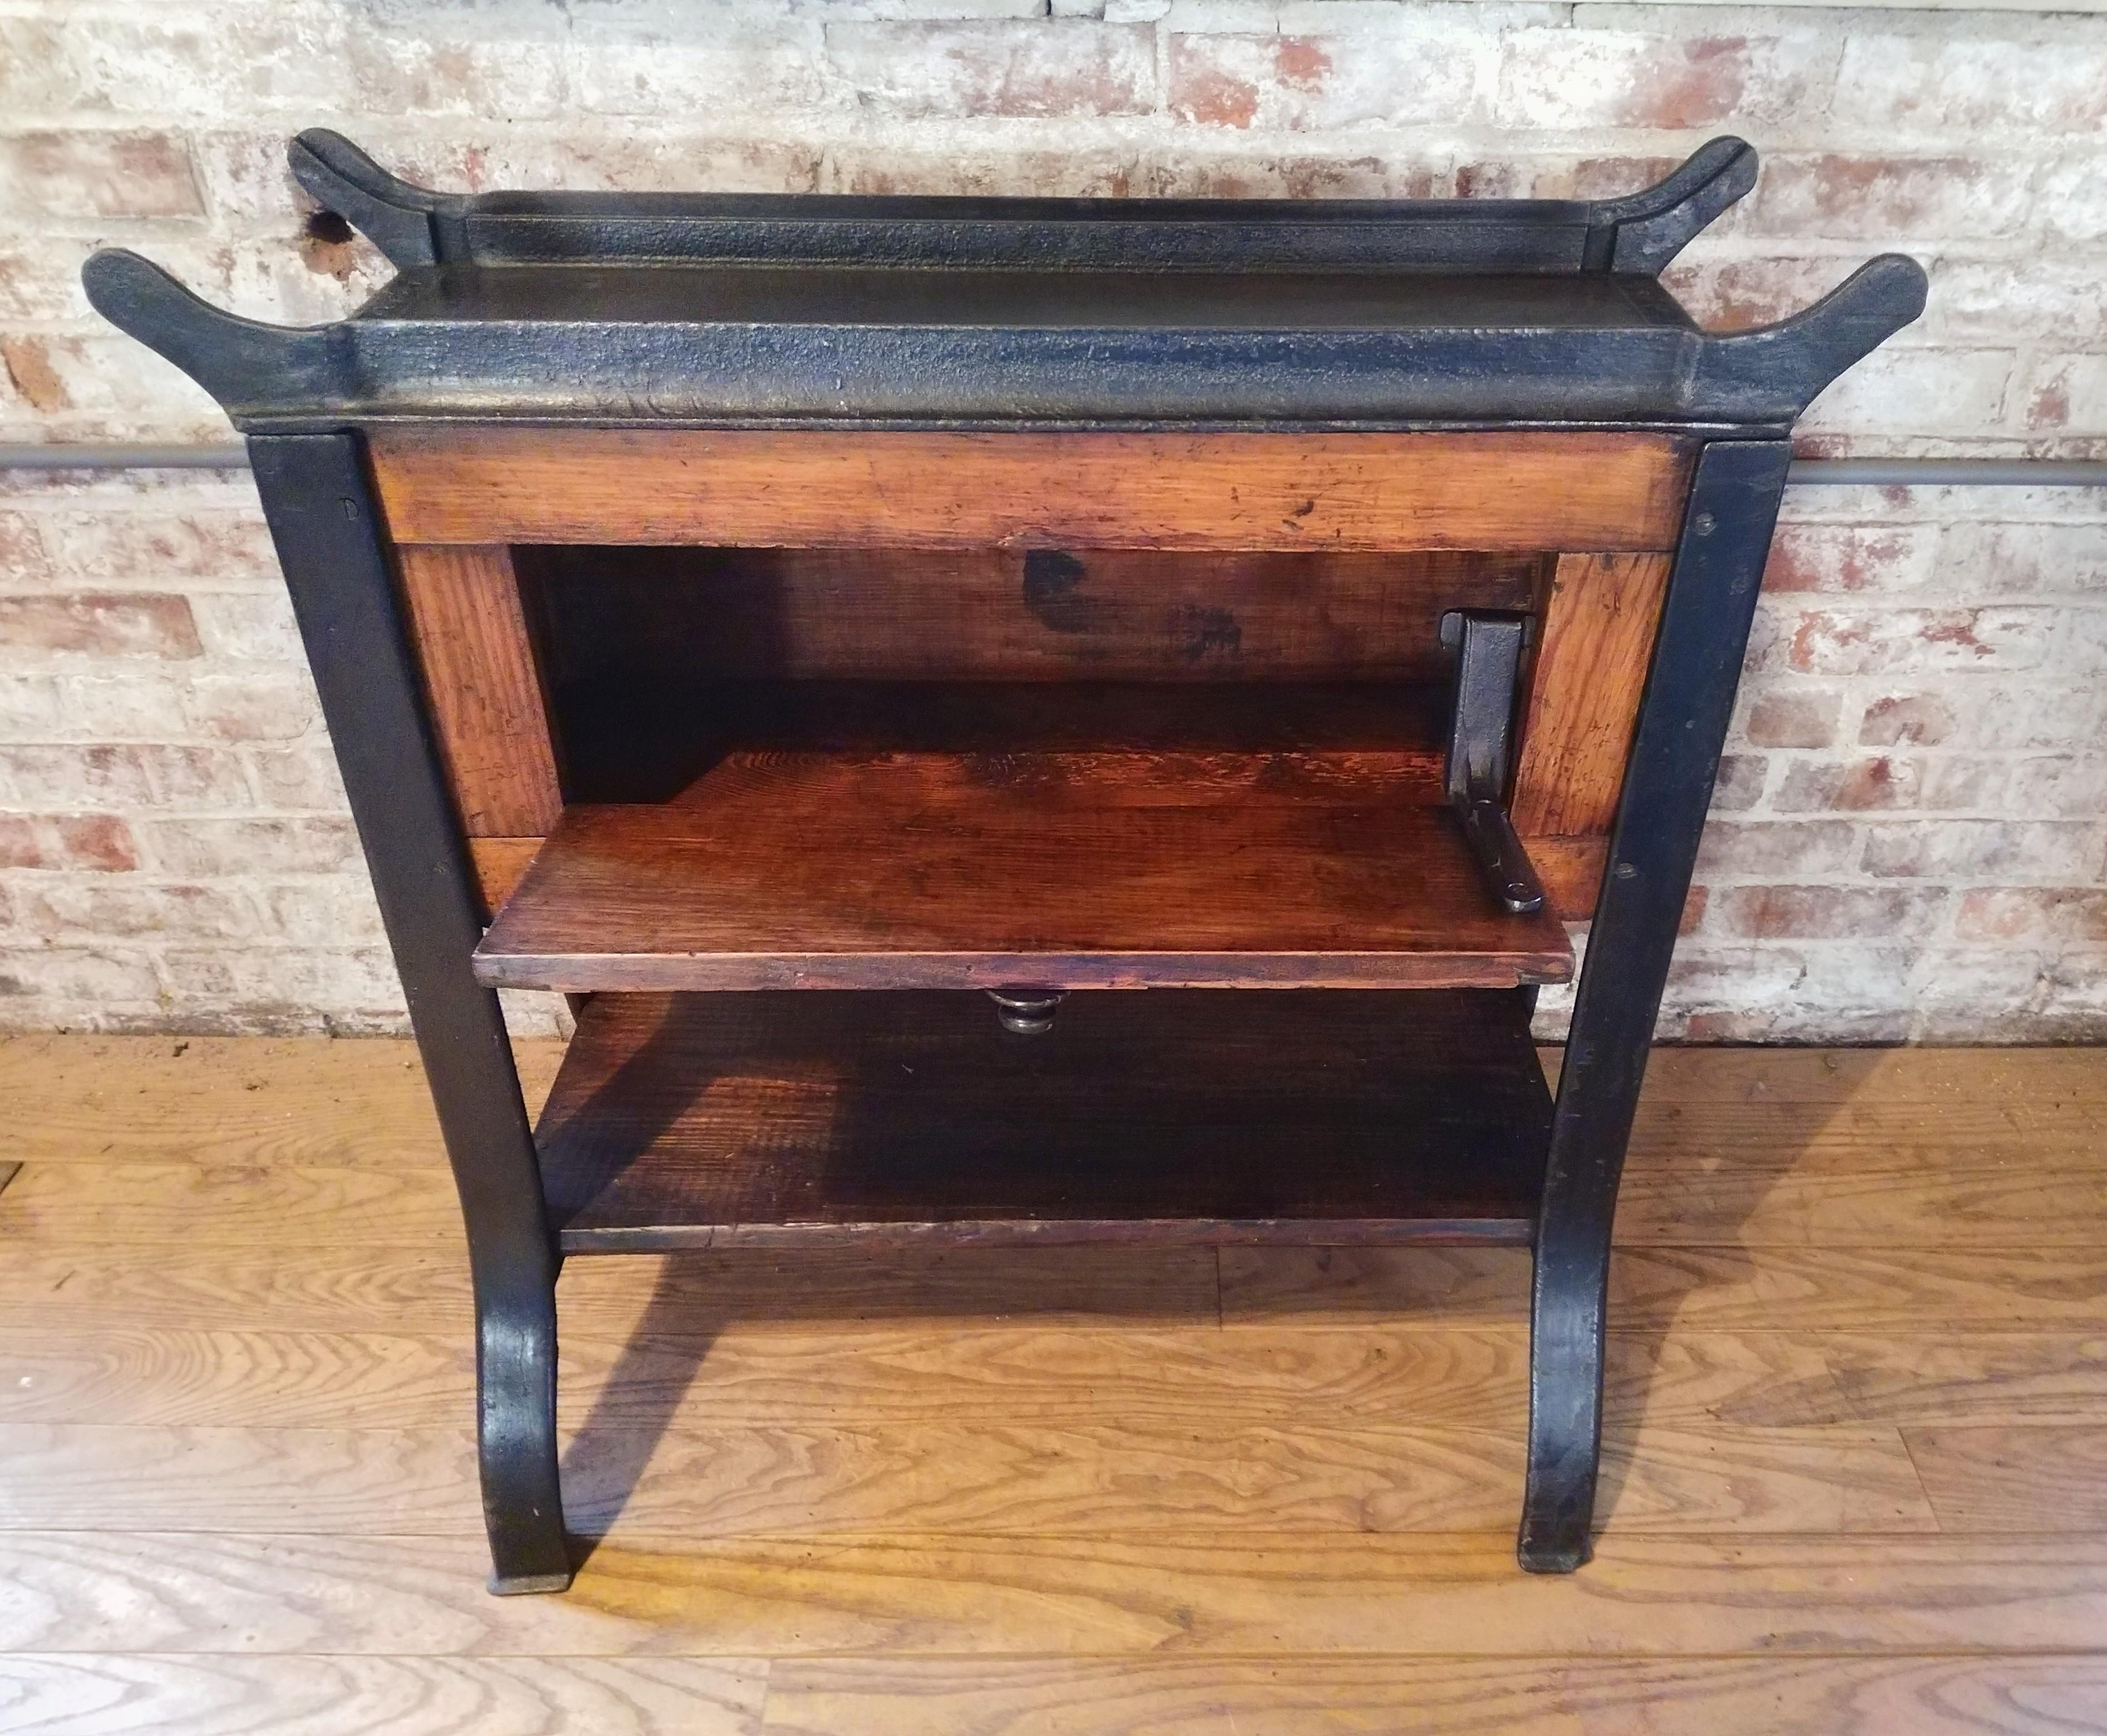 Vintage cast iron and wood printer's proof table with 